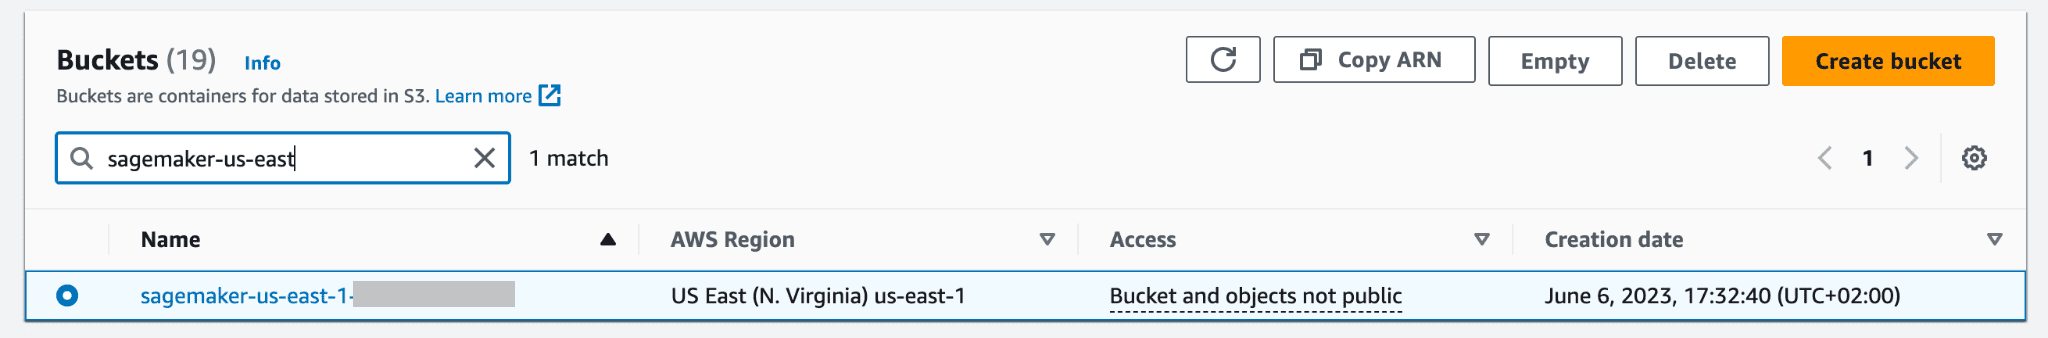 Amazon S3 console showing how to empty or remove a bucket entirely